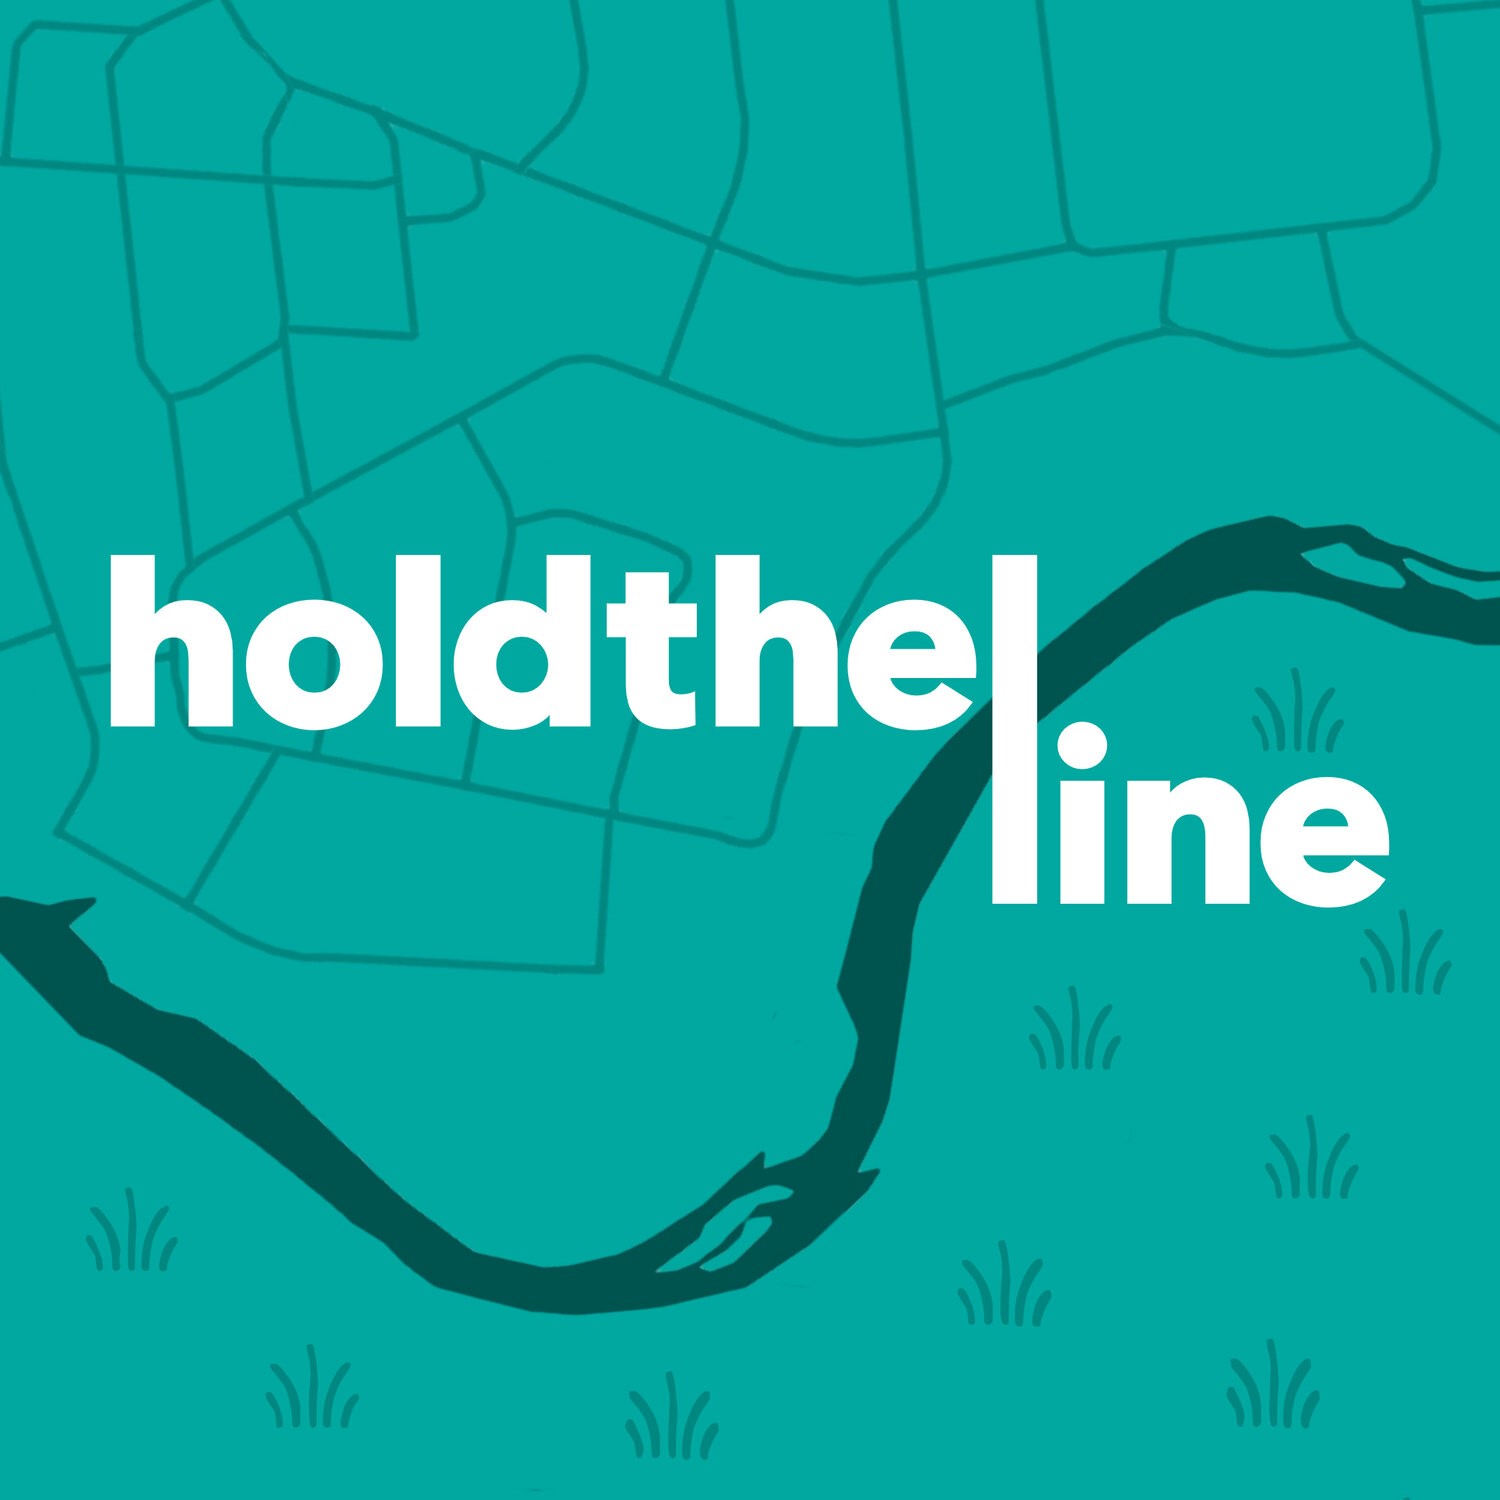 Hold The Line Waterloo Region cover image